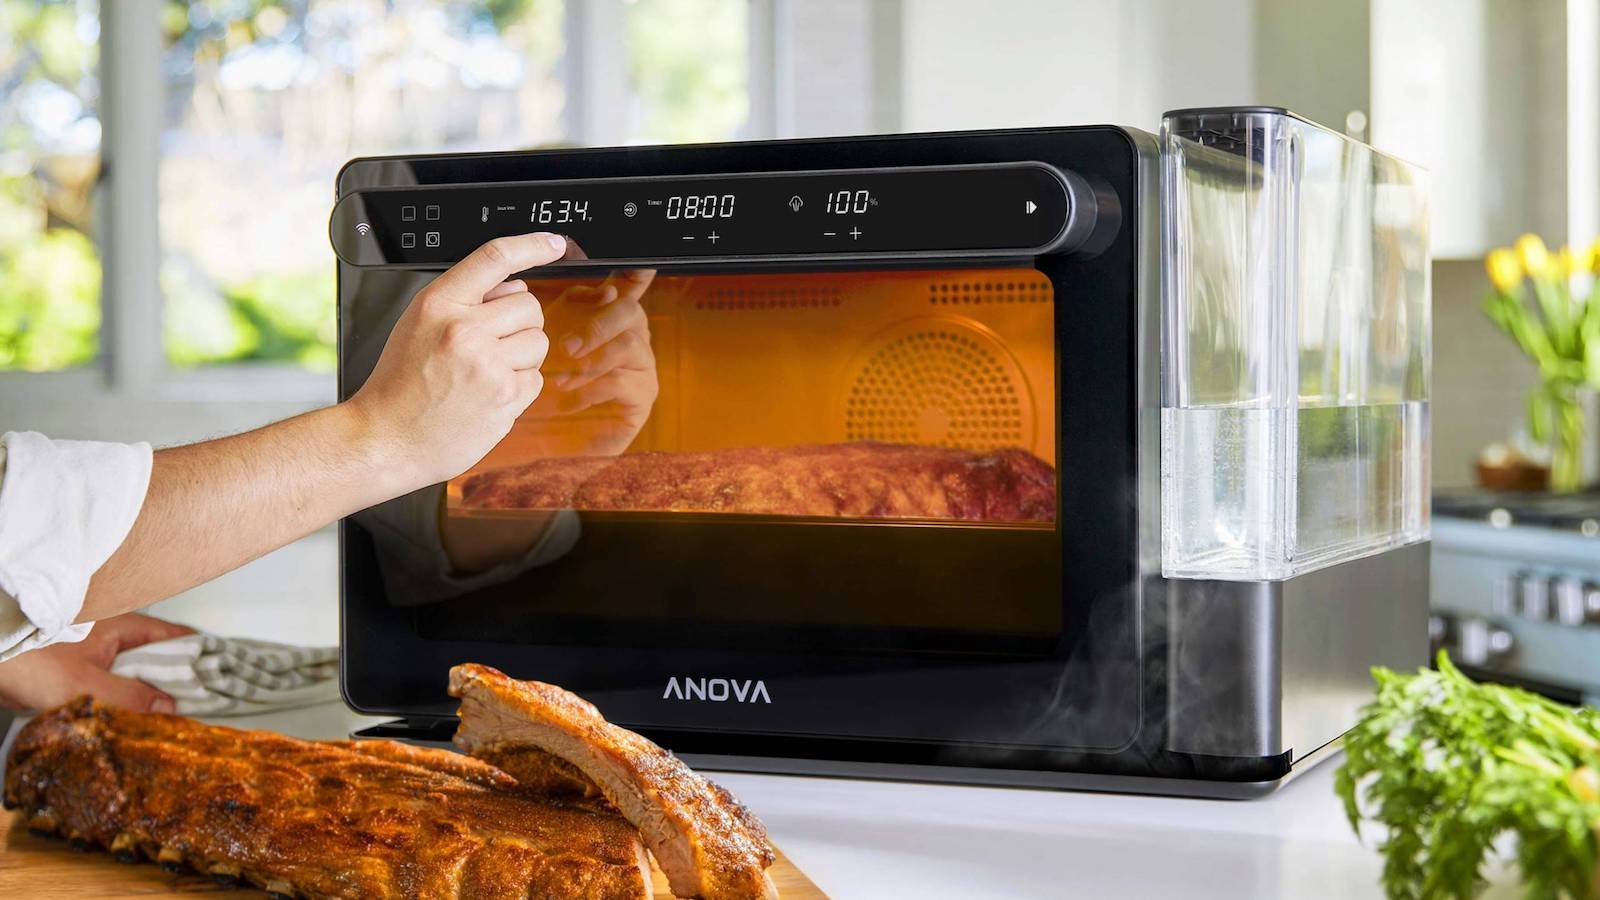 Anova Precision Oven combi-cooker lets you monitor your food from an app